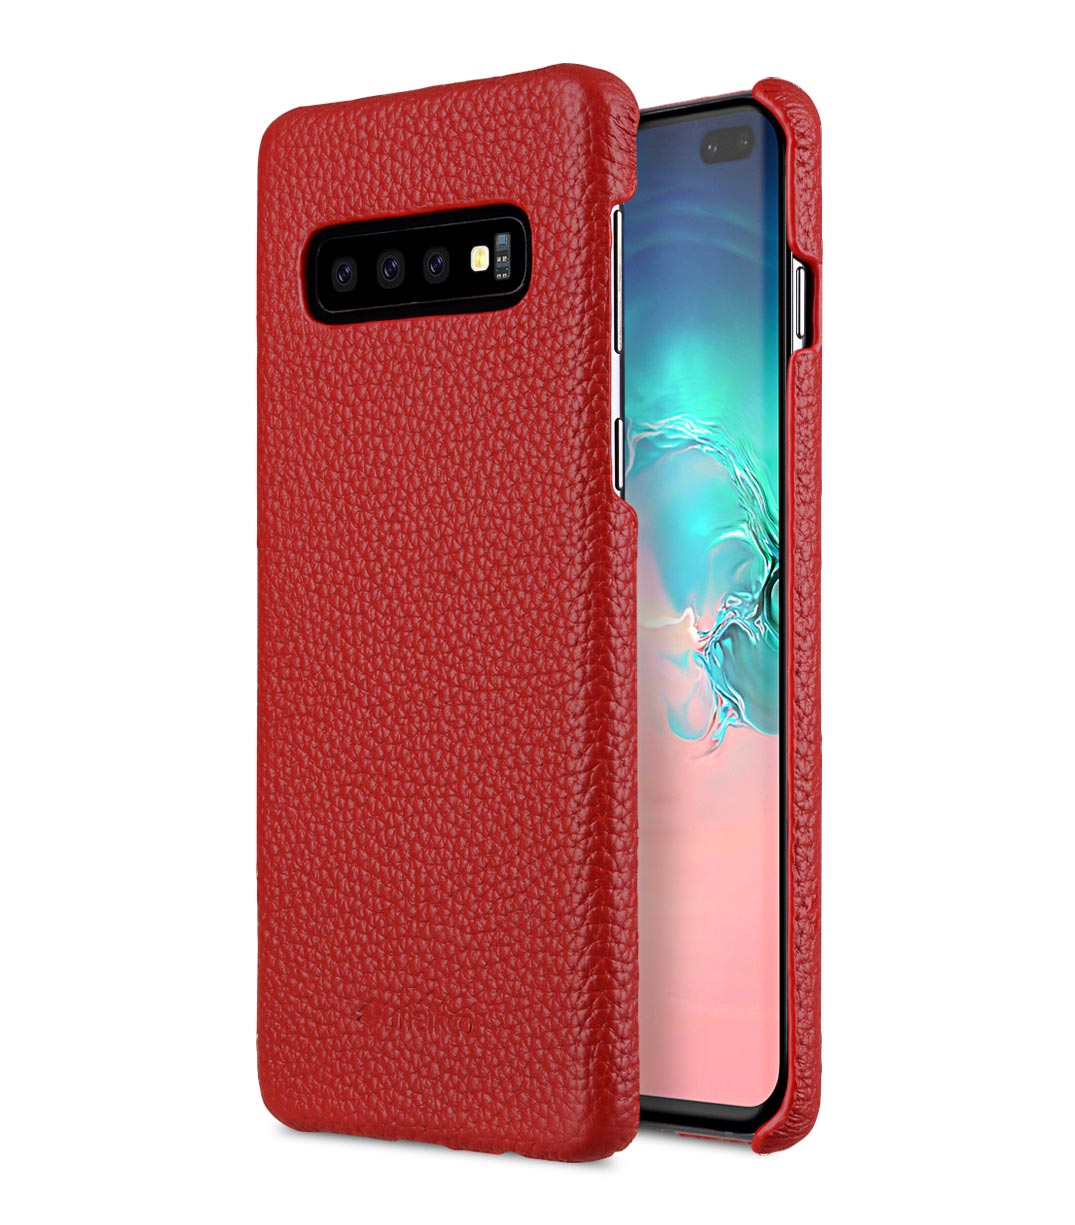 Premium Leather Snap Cover Case for Samsung Galaxy S10